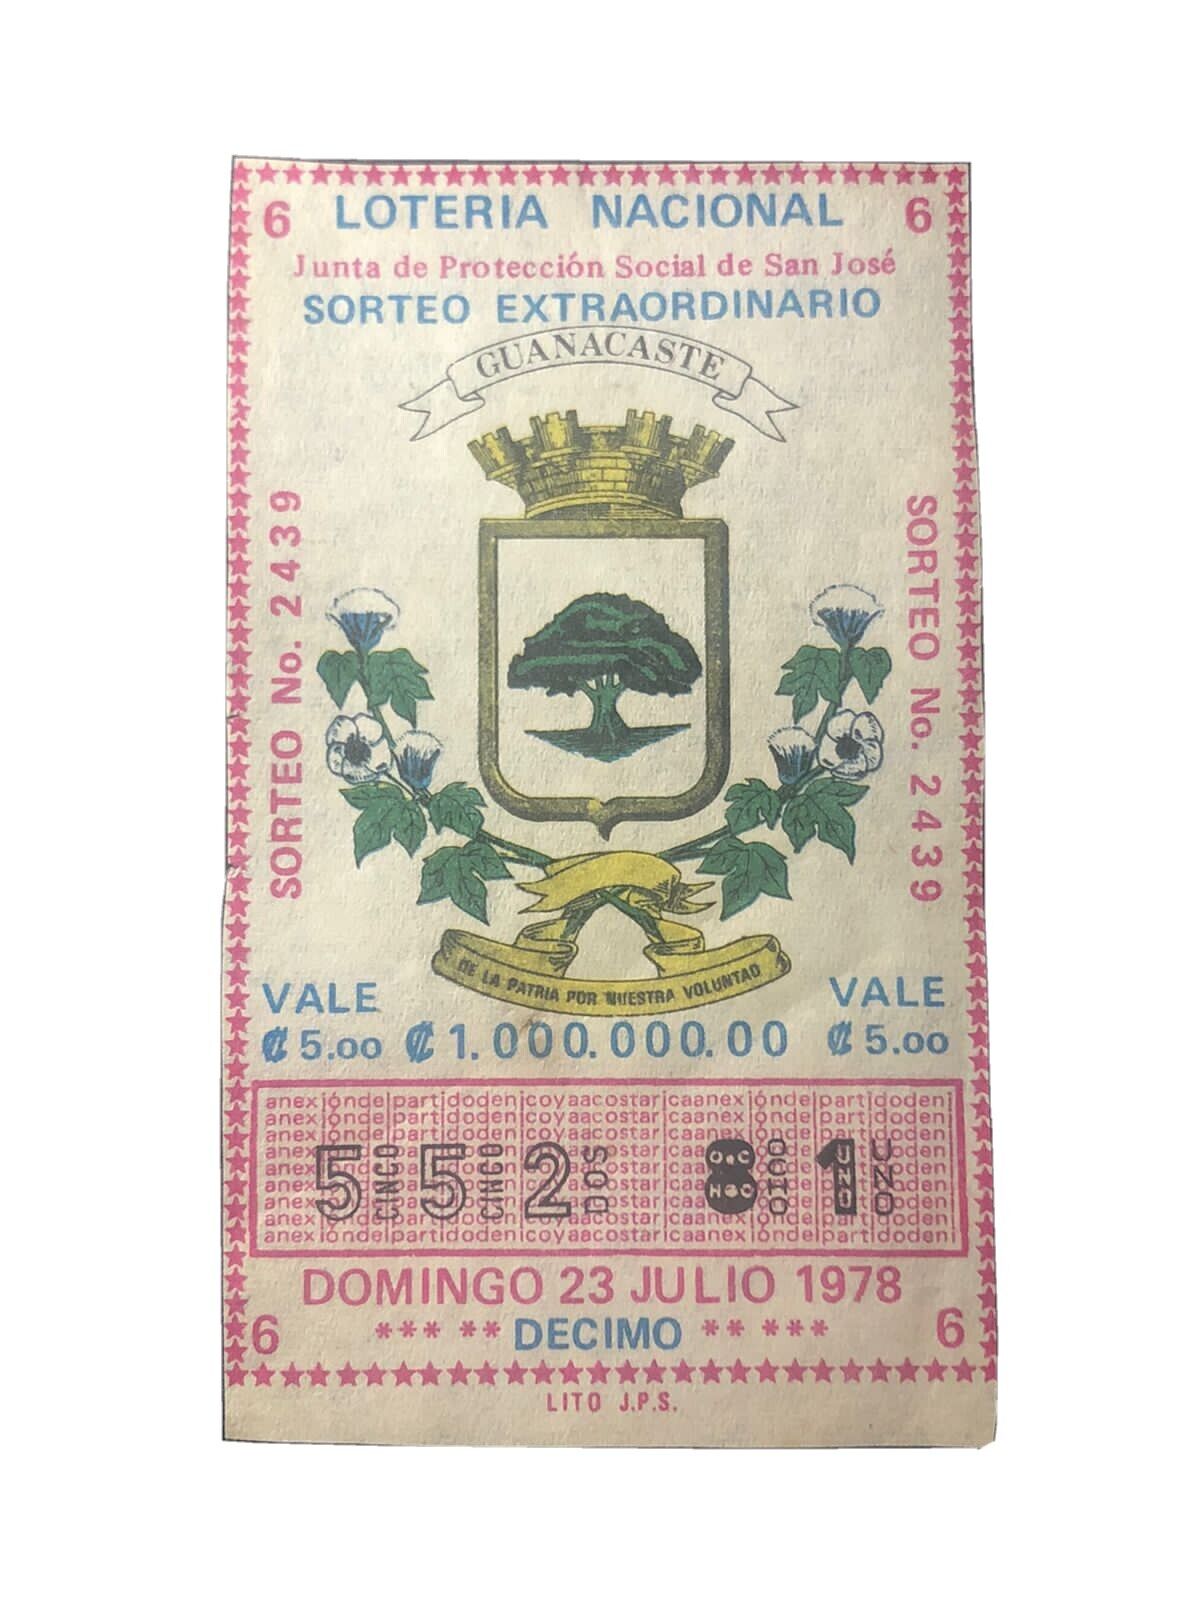 Costa Rica old lottery ticket LOTERIA POPULAR J.P.S. July 23th, 1978. Lot 2439.